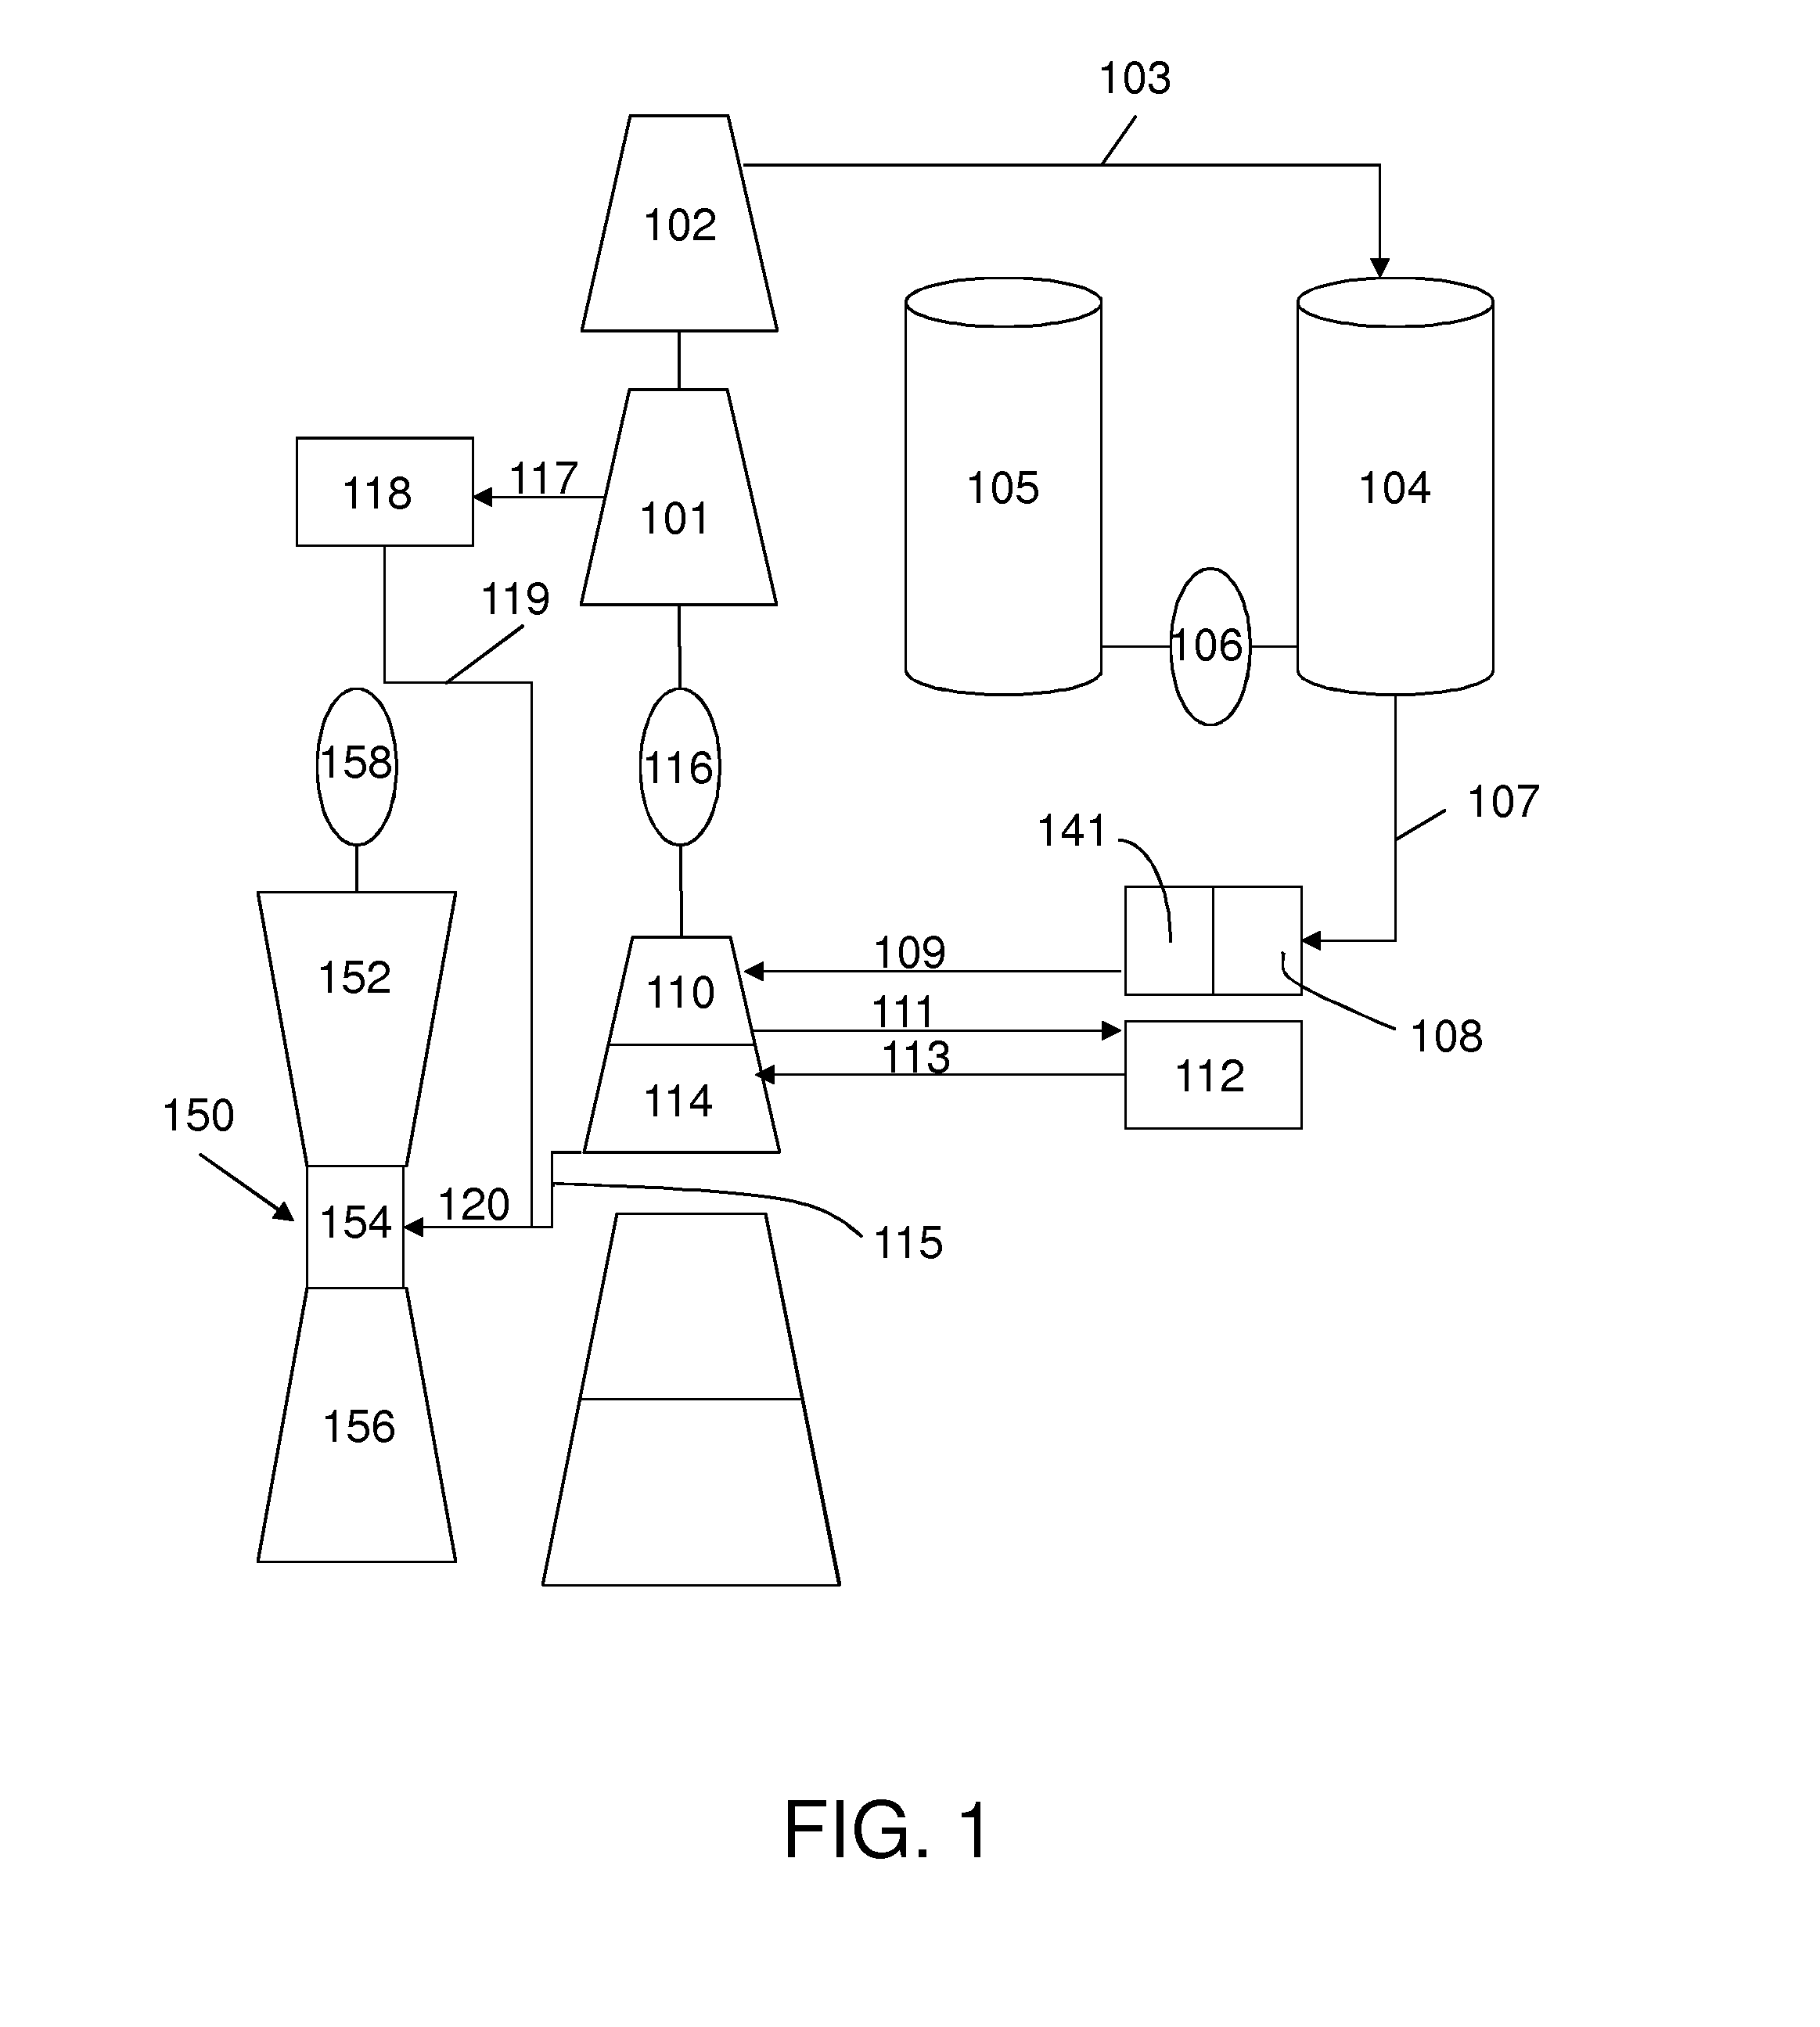 Grid scale energy storage systems using reheated air turbine or gas turbine expanders